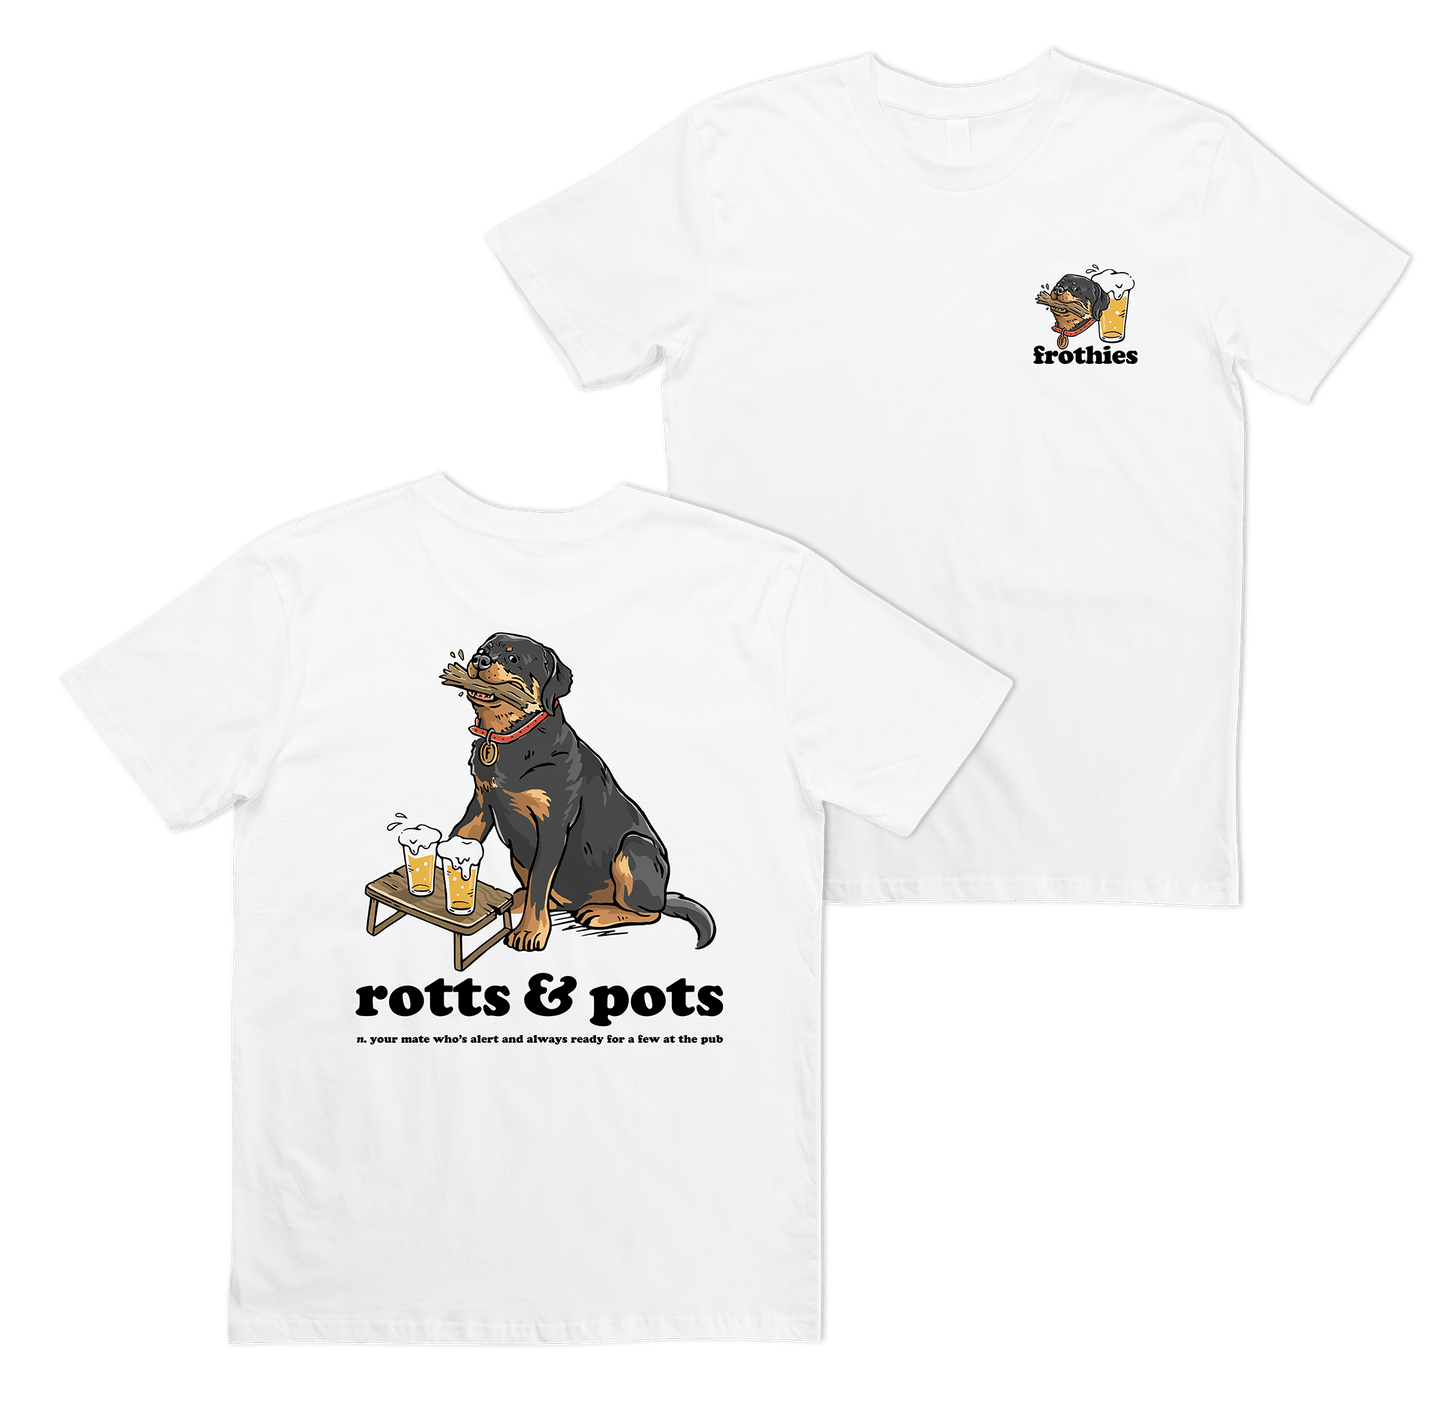 Rotts & Pots Tee T-Shirt Frothies